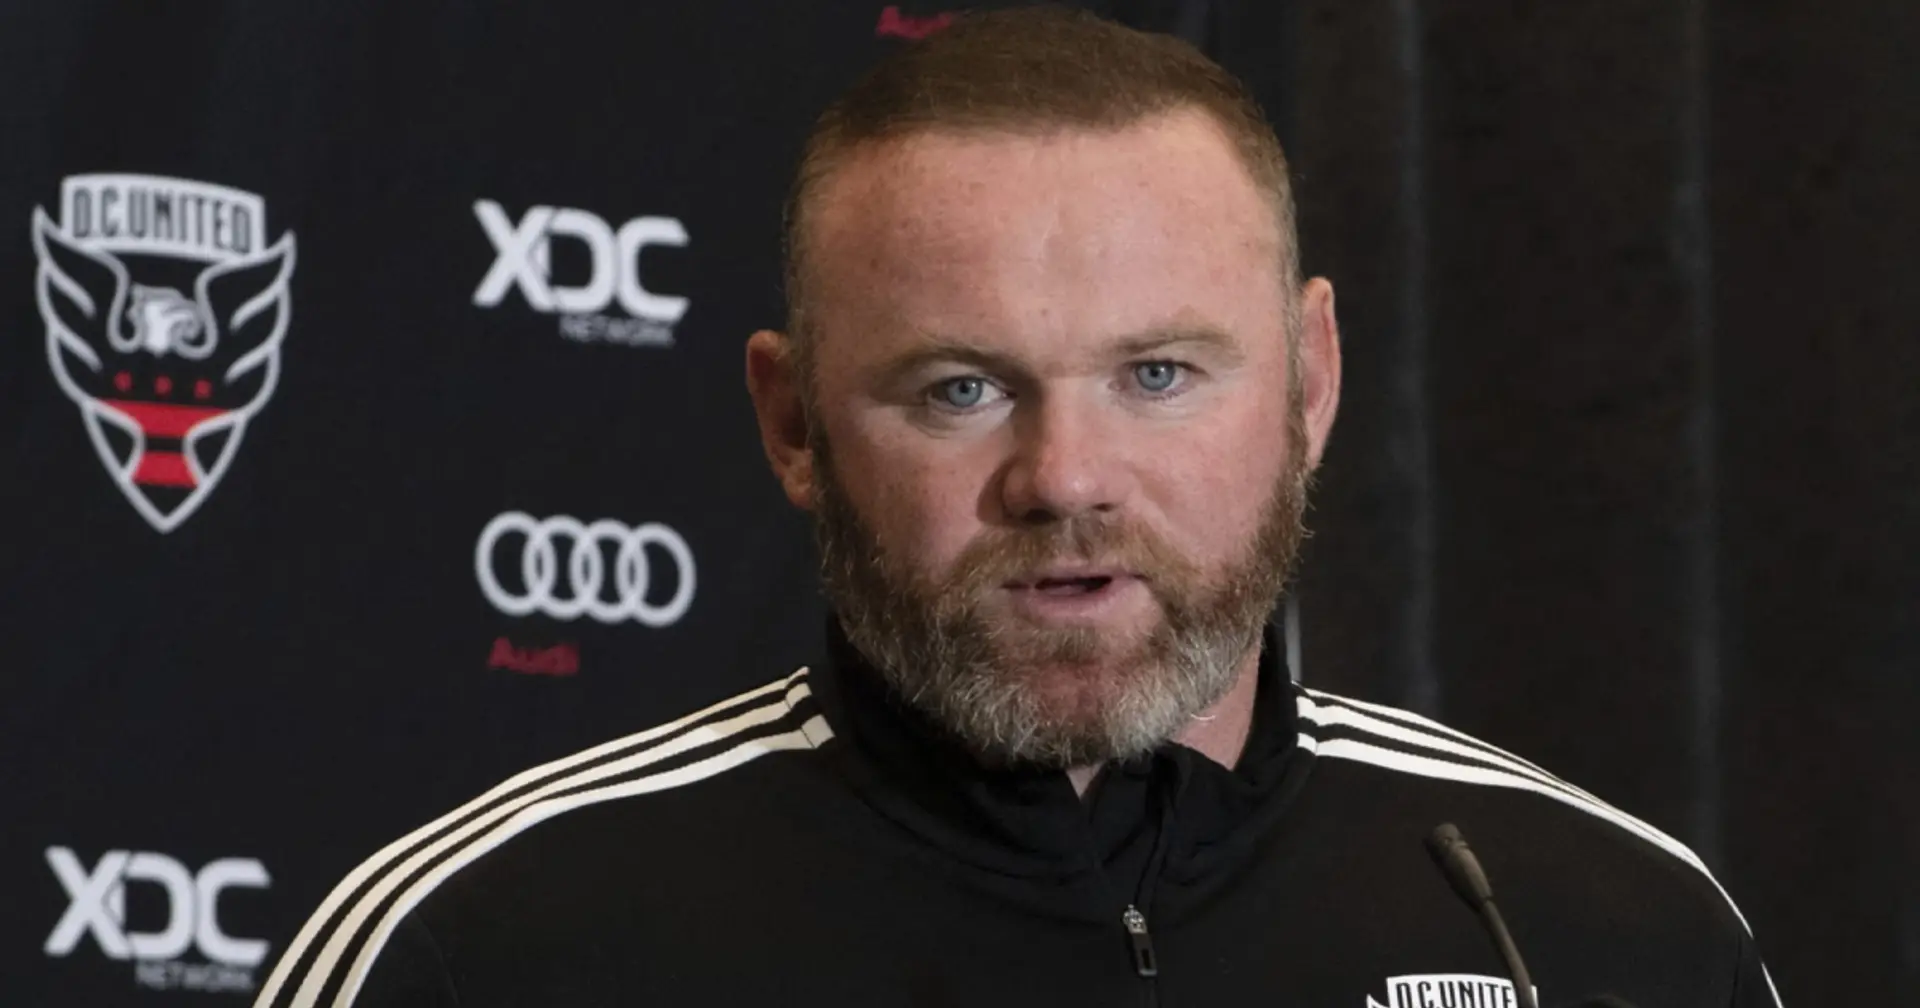 Wayne Rooney names ultimate goal as manager, explains how MLS move helps him